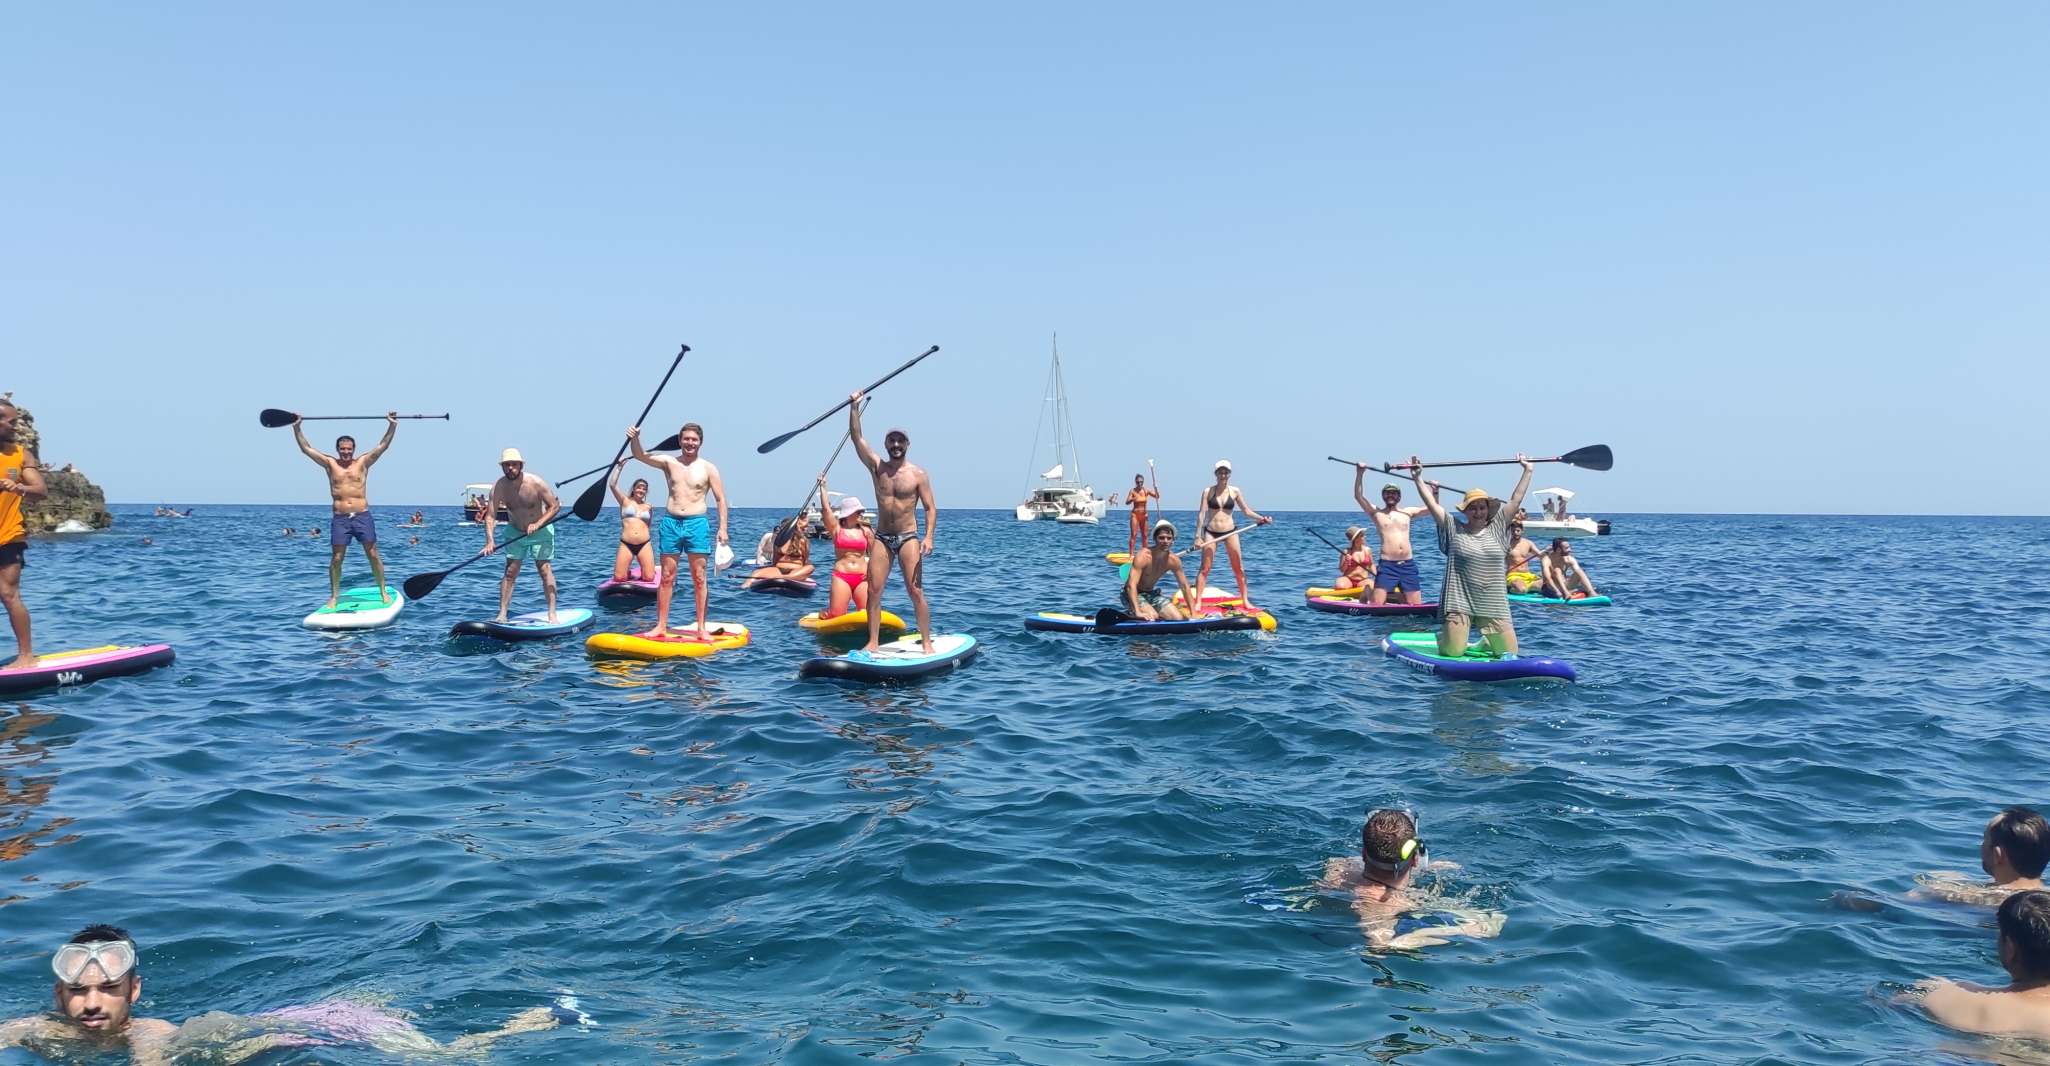 Polignano a Mare, Stand-Up Paddle Board Sea Cave Trip - Housity